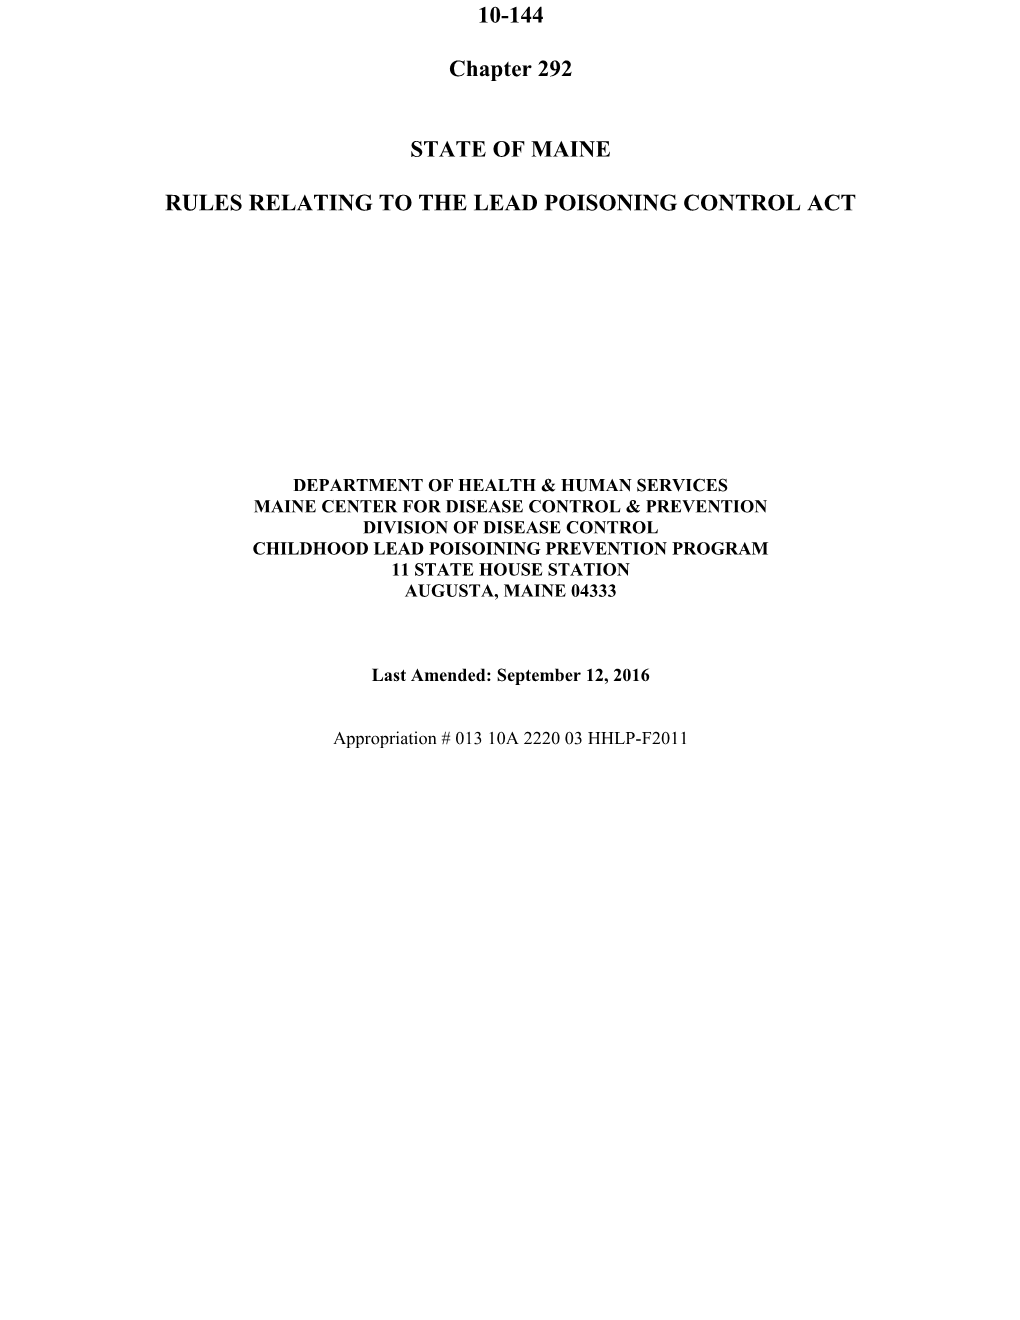 Rules Relating to the Lead Poisoning Control Act